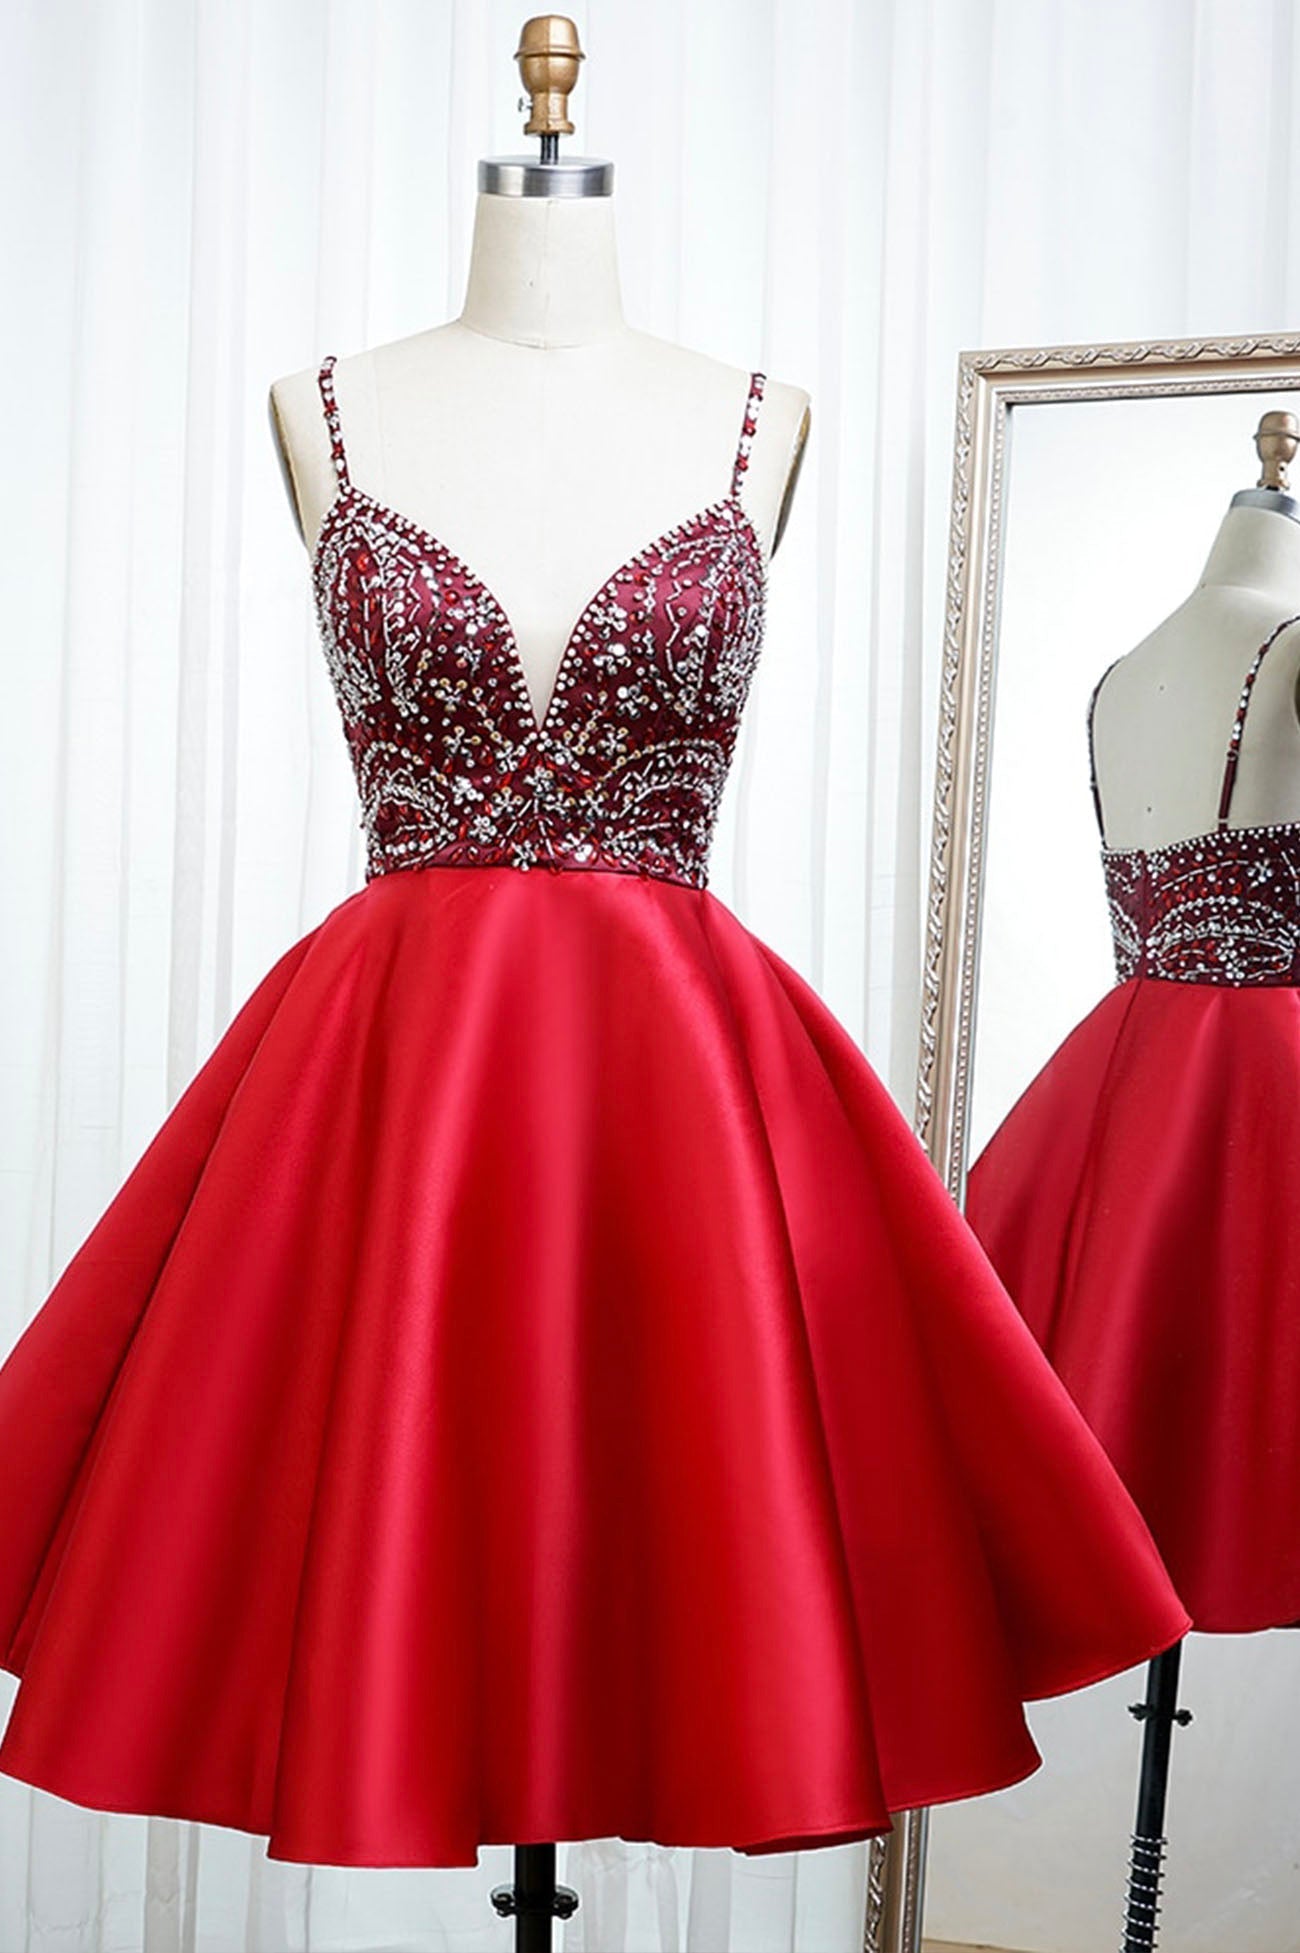 Red Satin Beading Short Corset Prom Dresses, A-Line Corset Homecoming Dresses outfit, Party Dresses Shopping